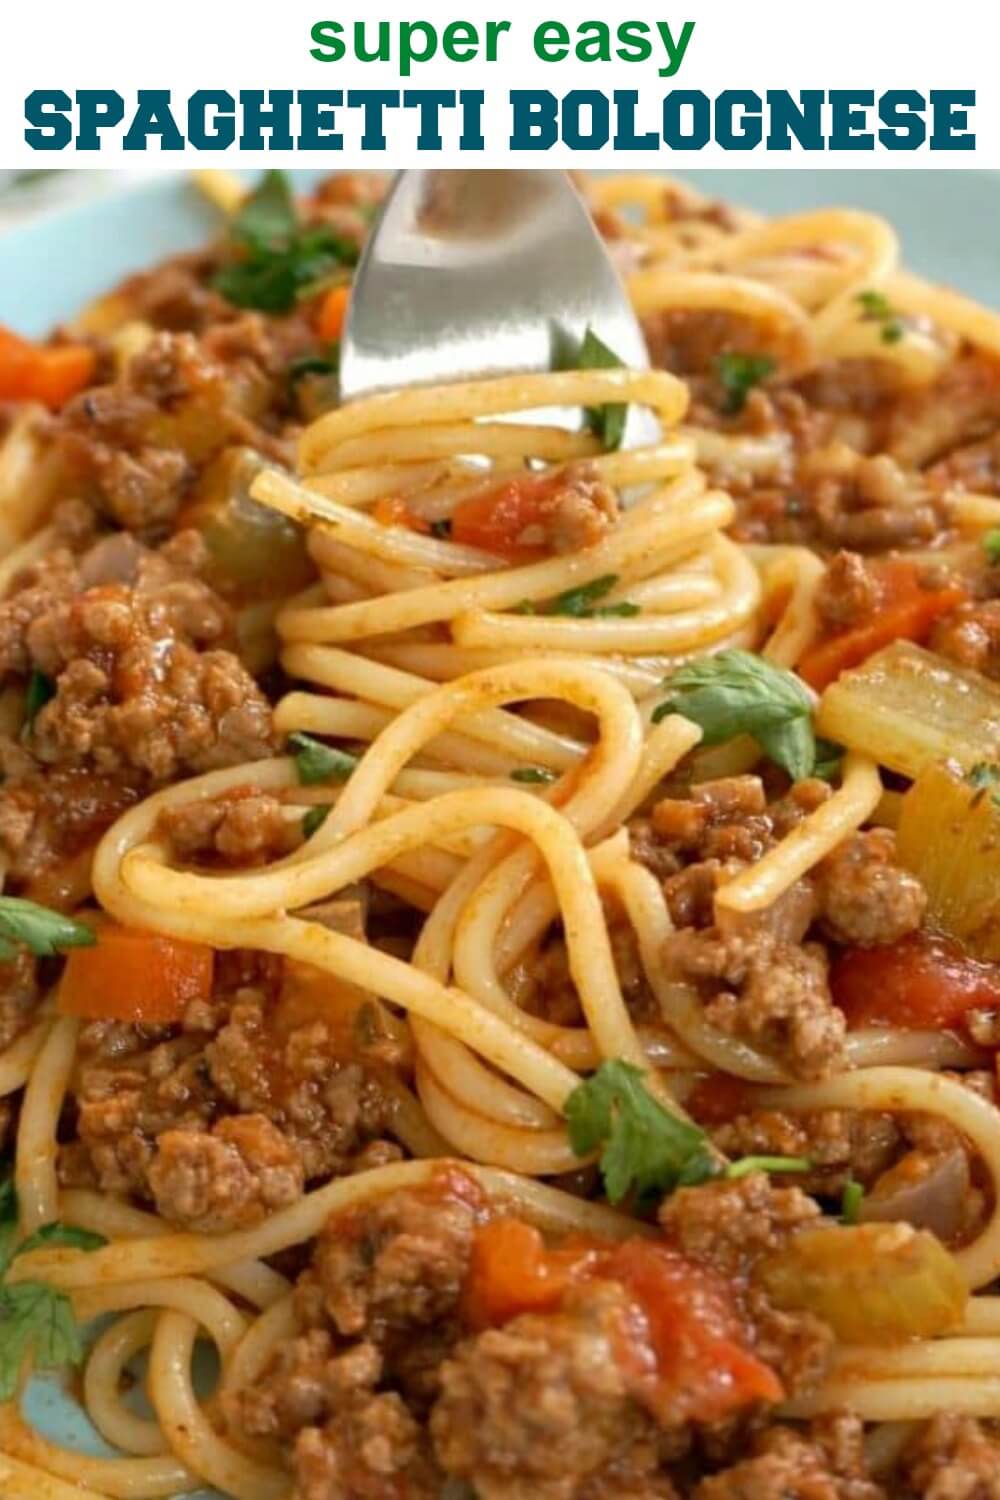 Easy Bolognese Sauce (No Wine) - My Gorgeous Recipes